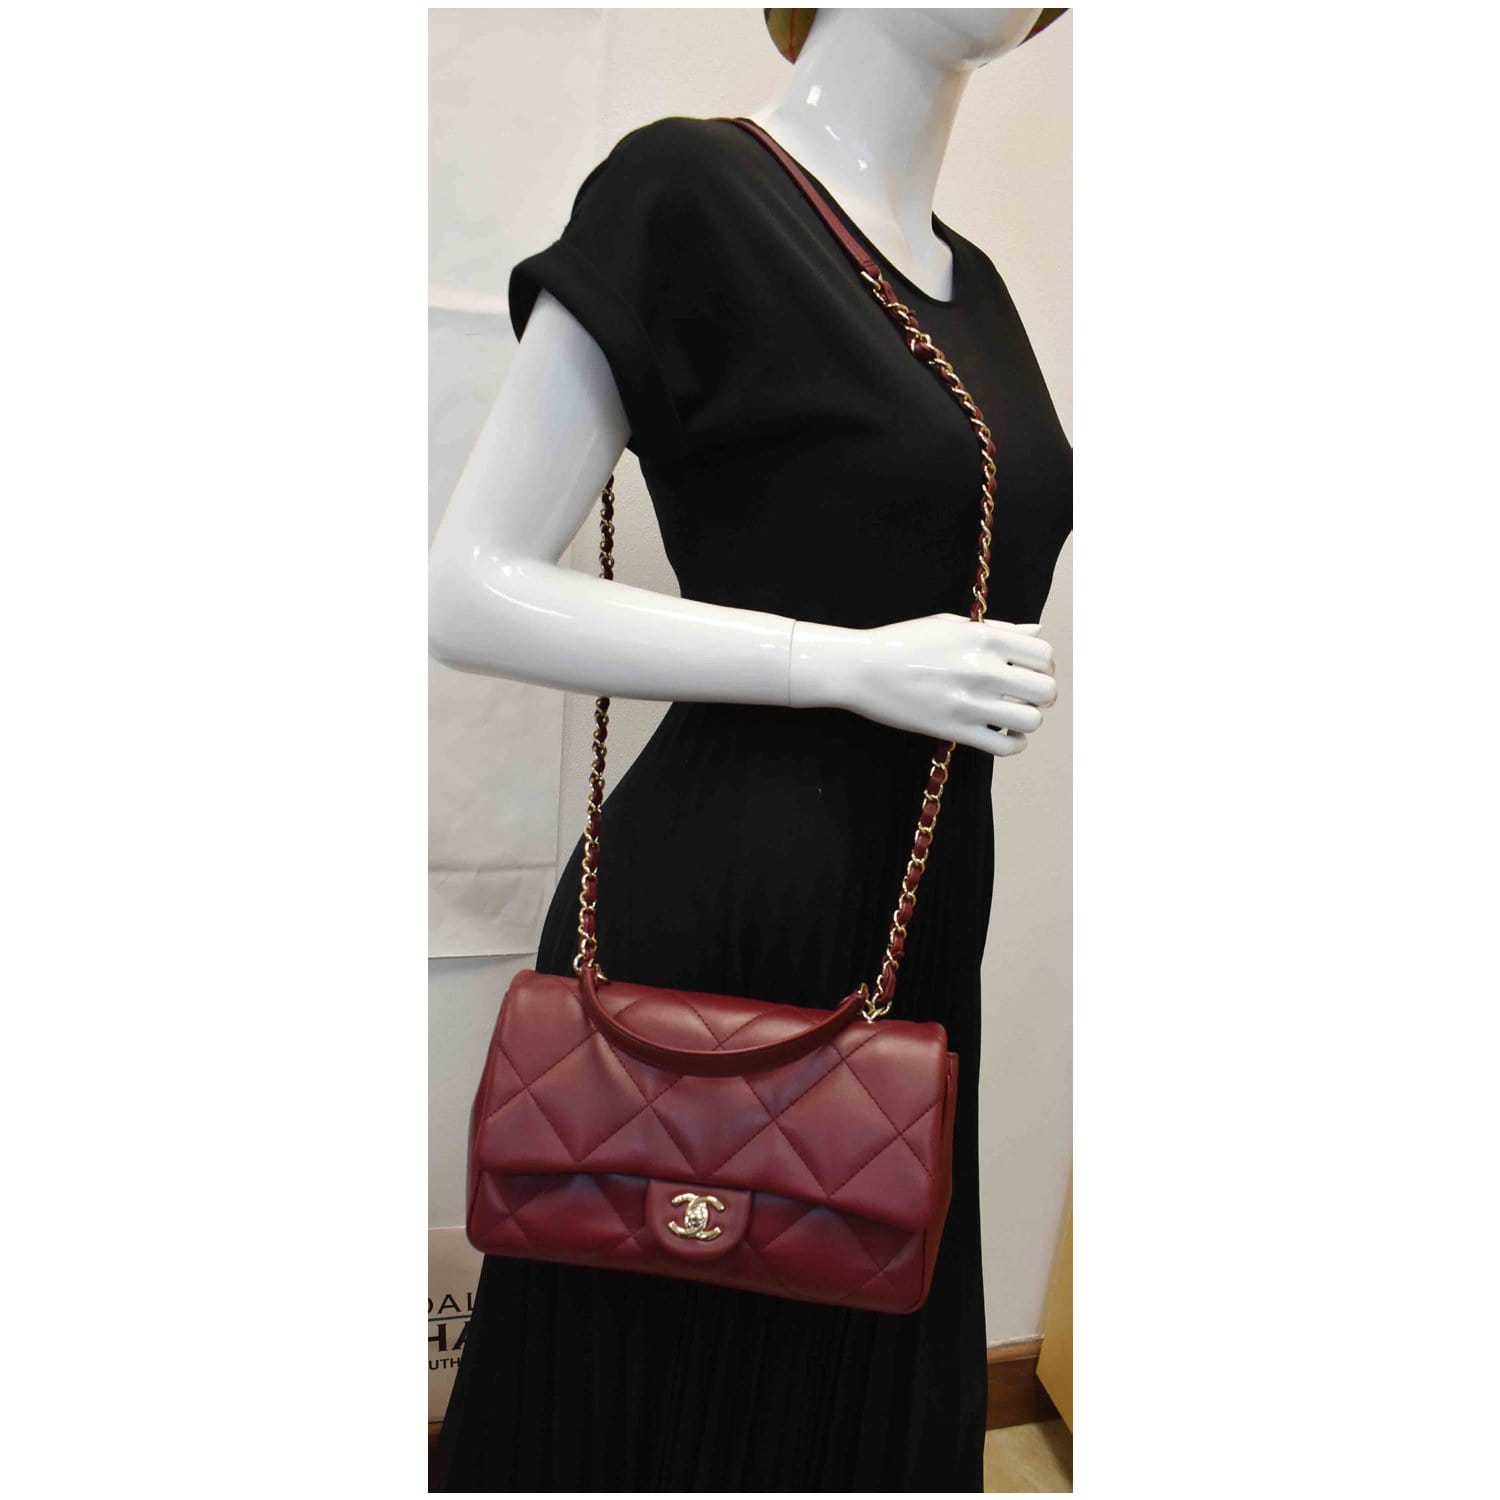 Chanel Burgundy Quilted Lambskin Leather Large Boy Bag